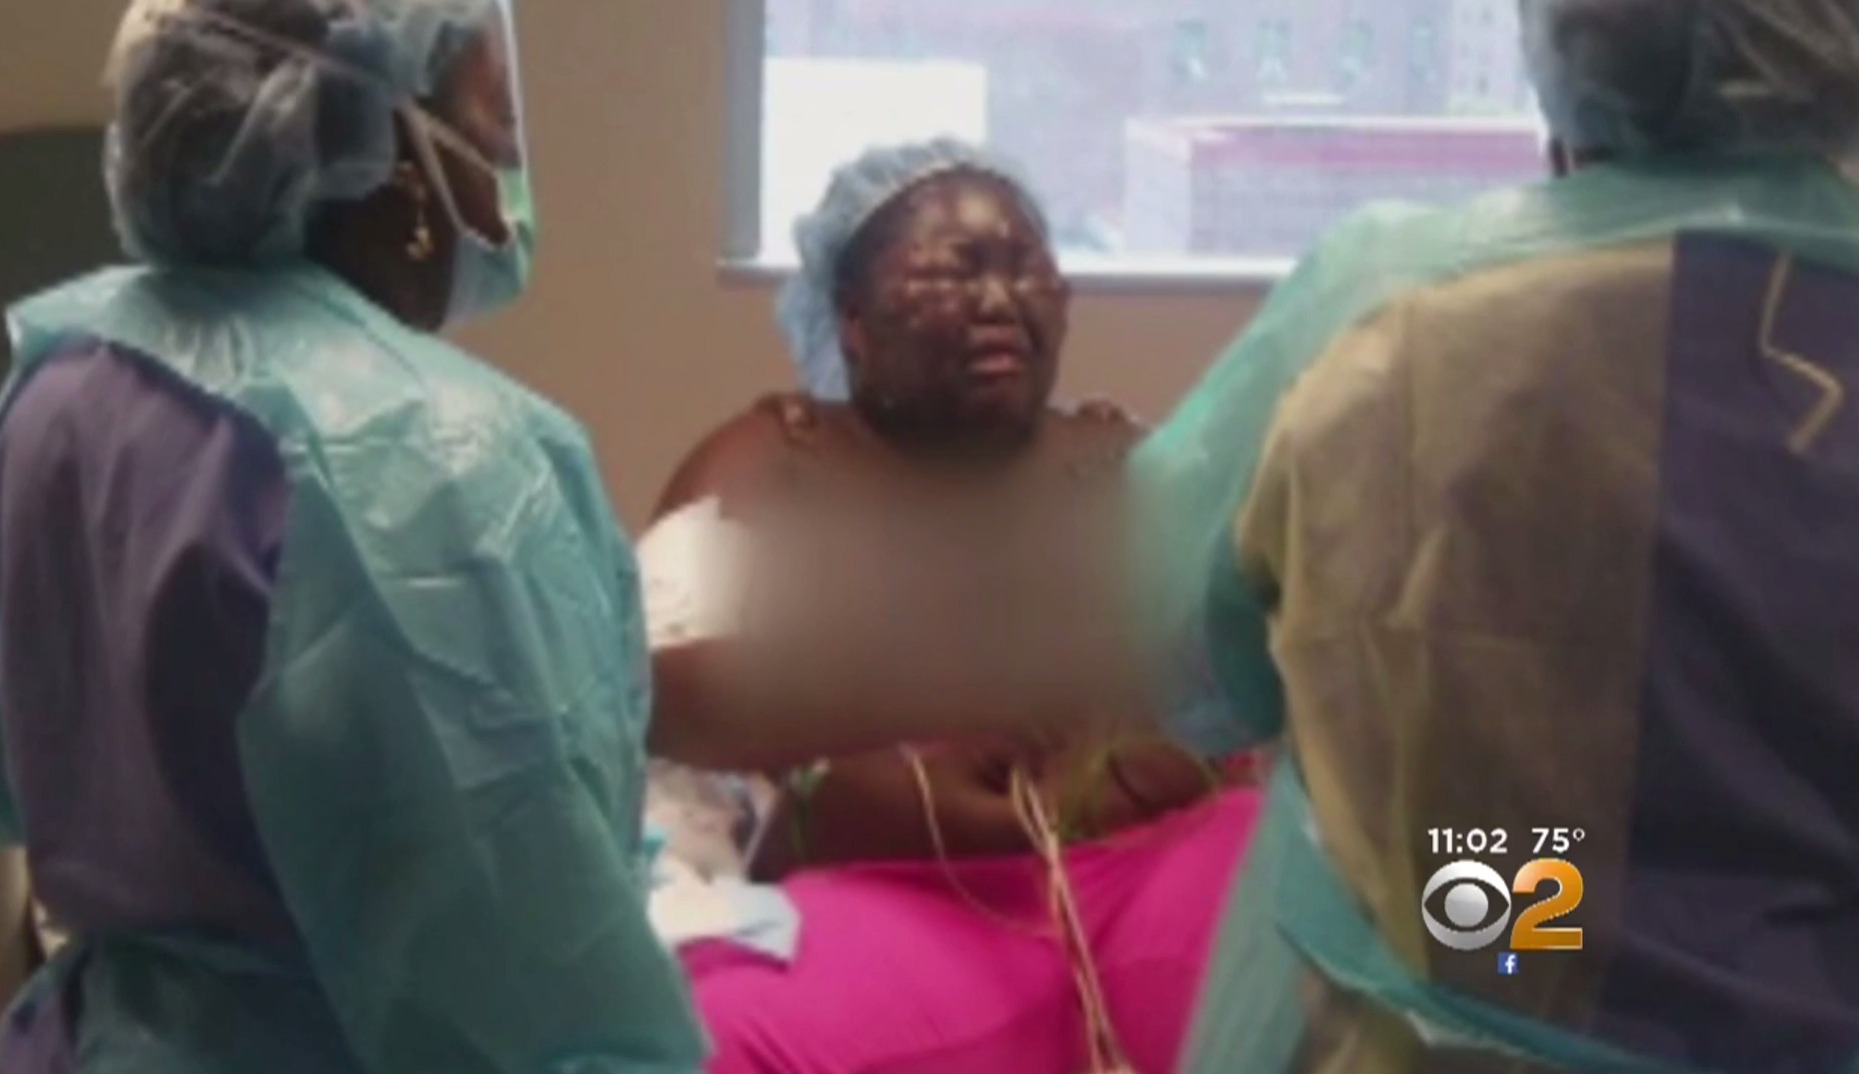 Girls Face Severely Burned When Another Girl Pours Boiling Water On